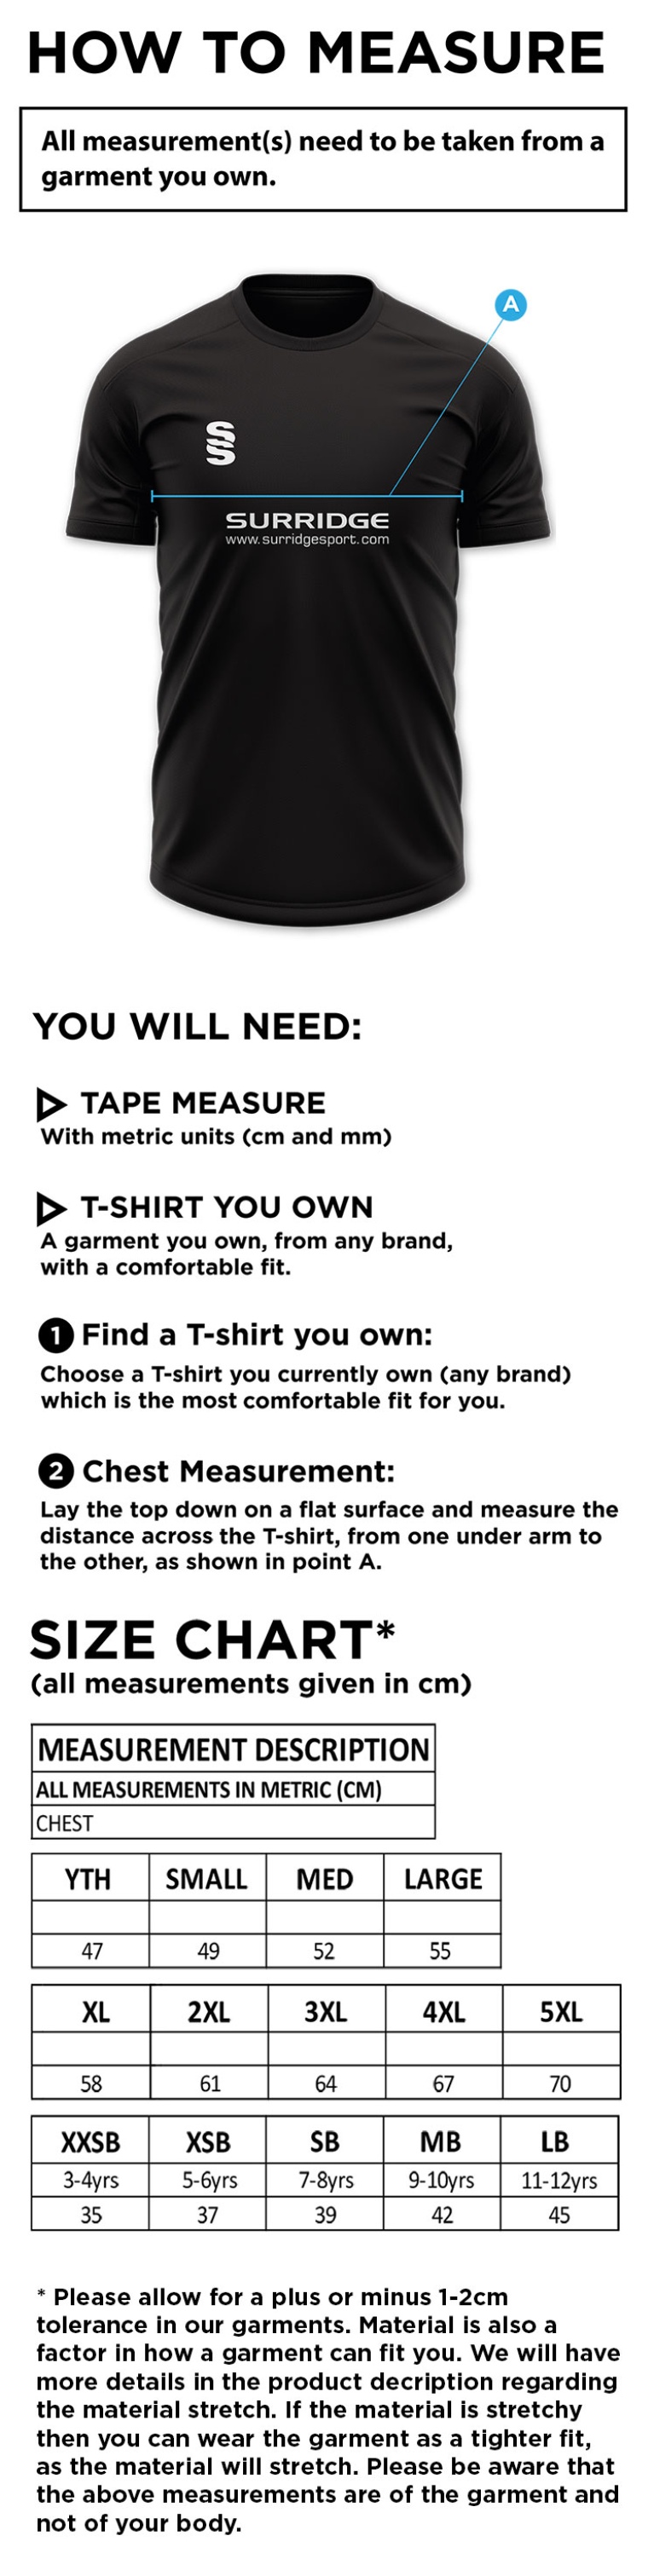 Youth's Camo Games Shirt : White - Size Guide